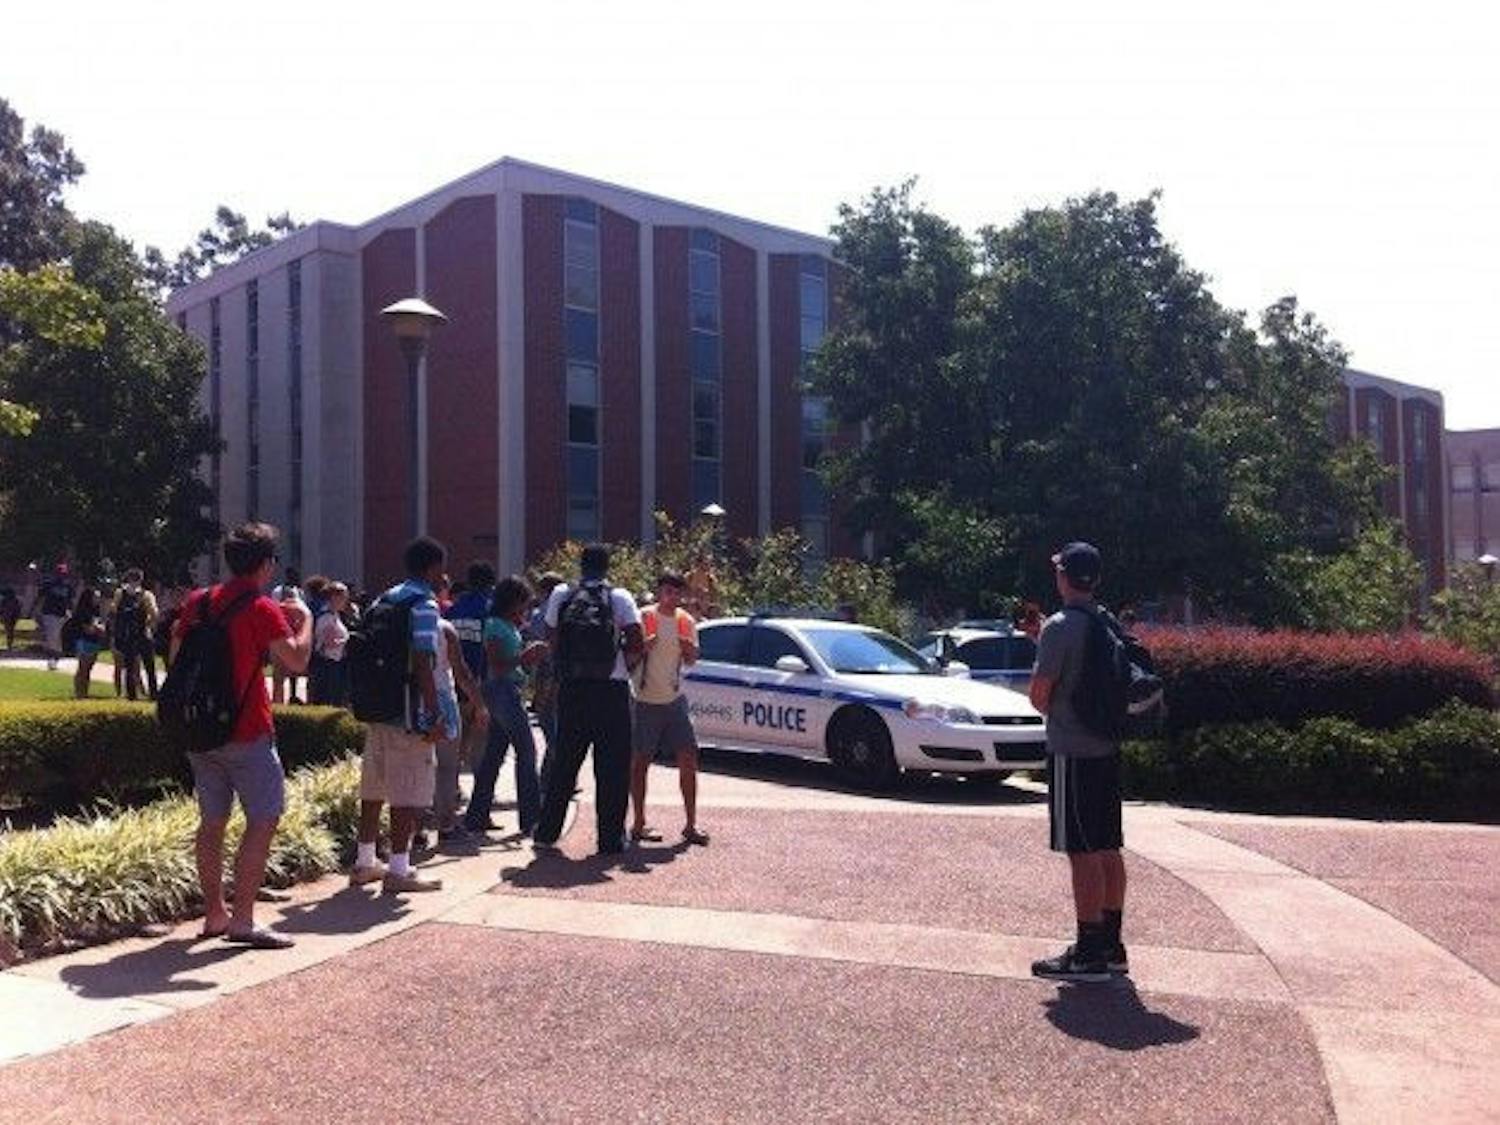 Police on campus take man to psychiatric services